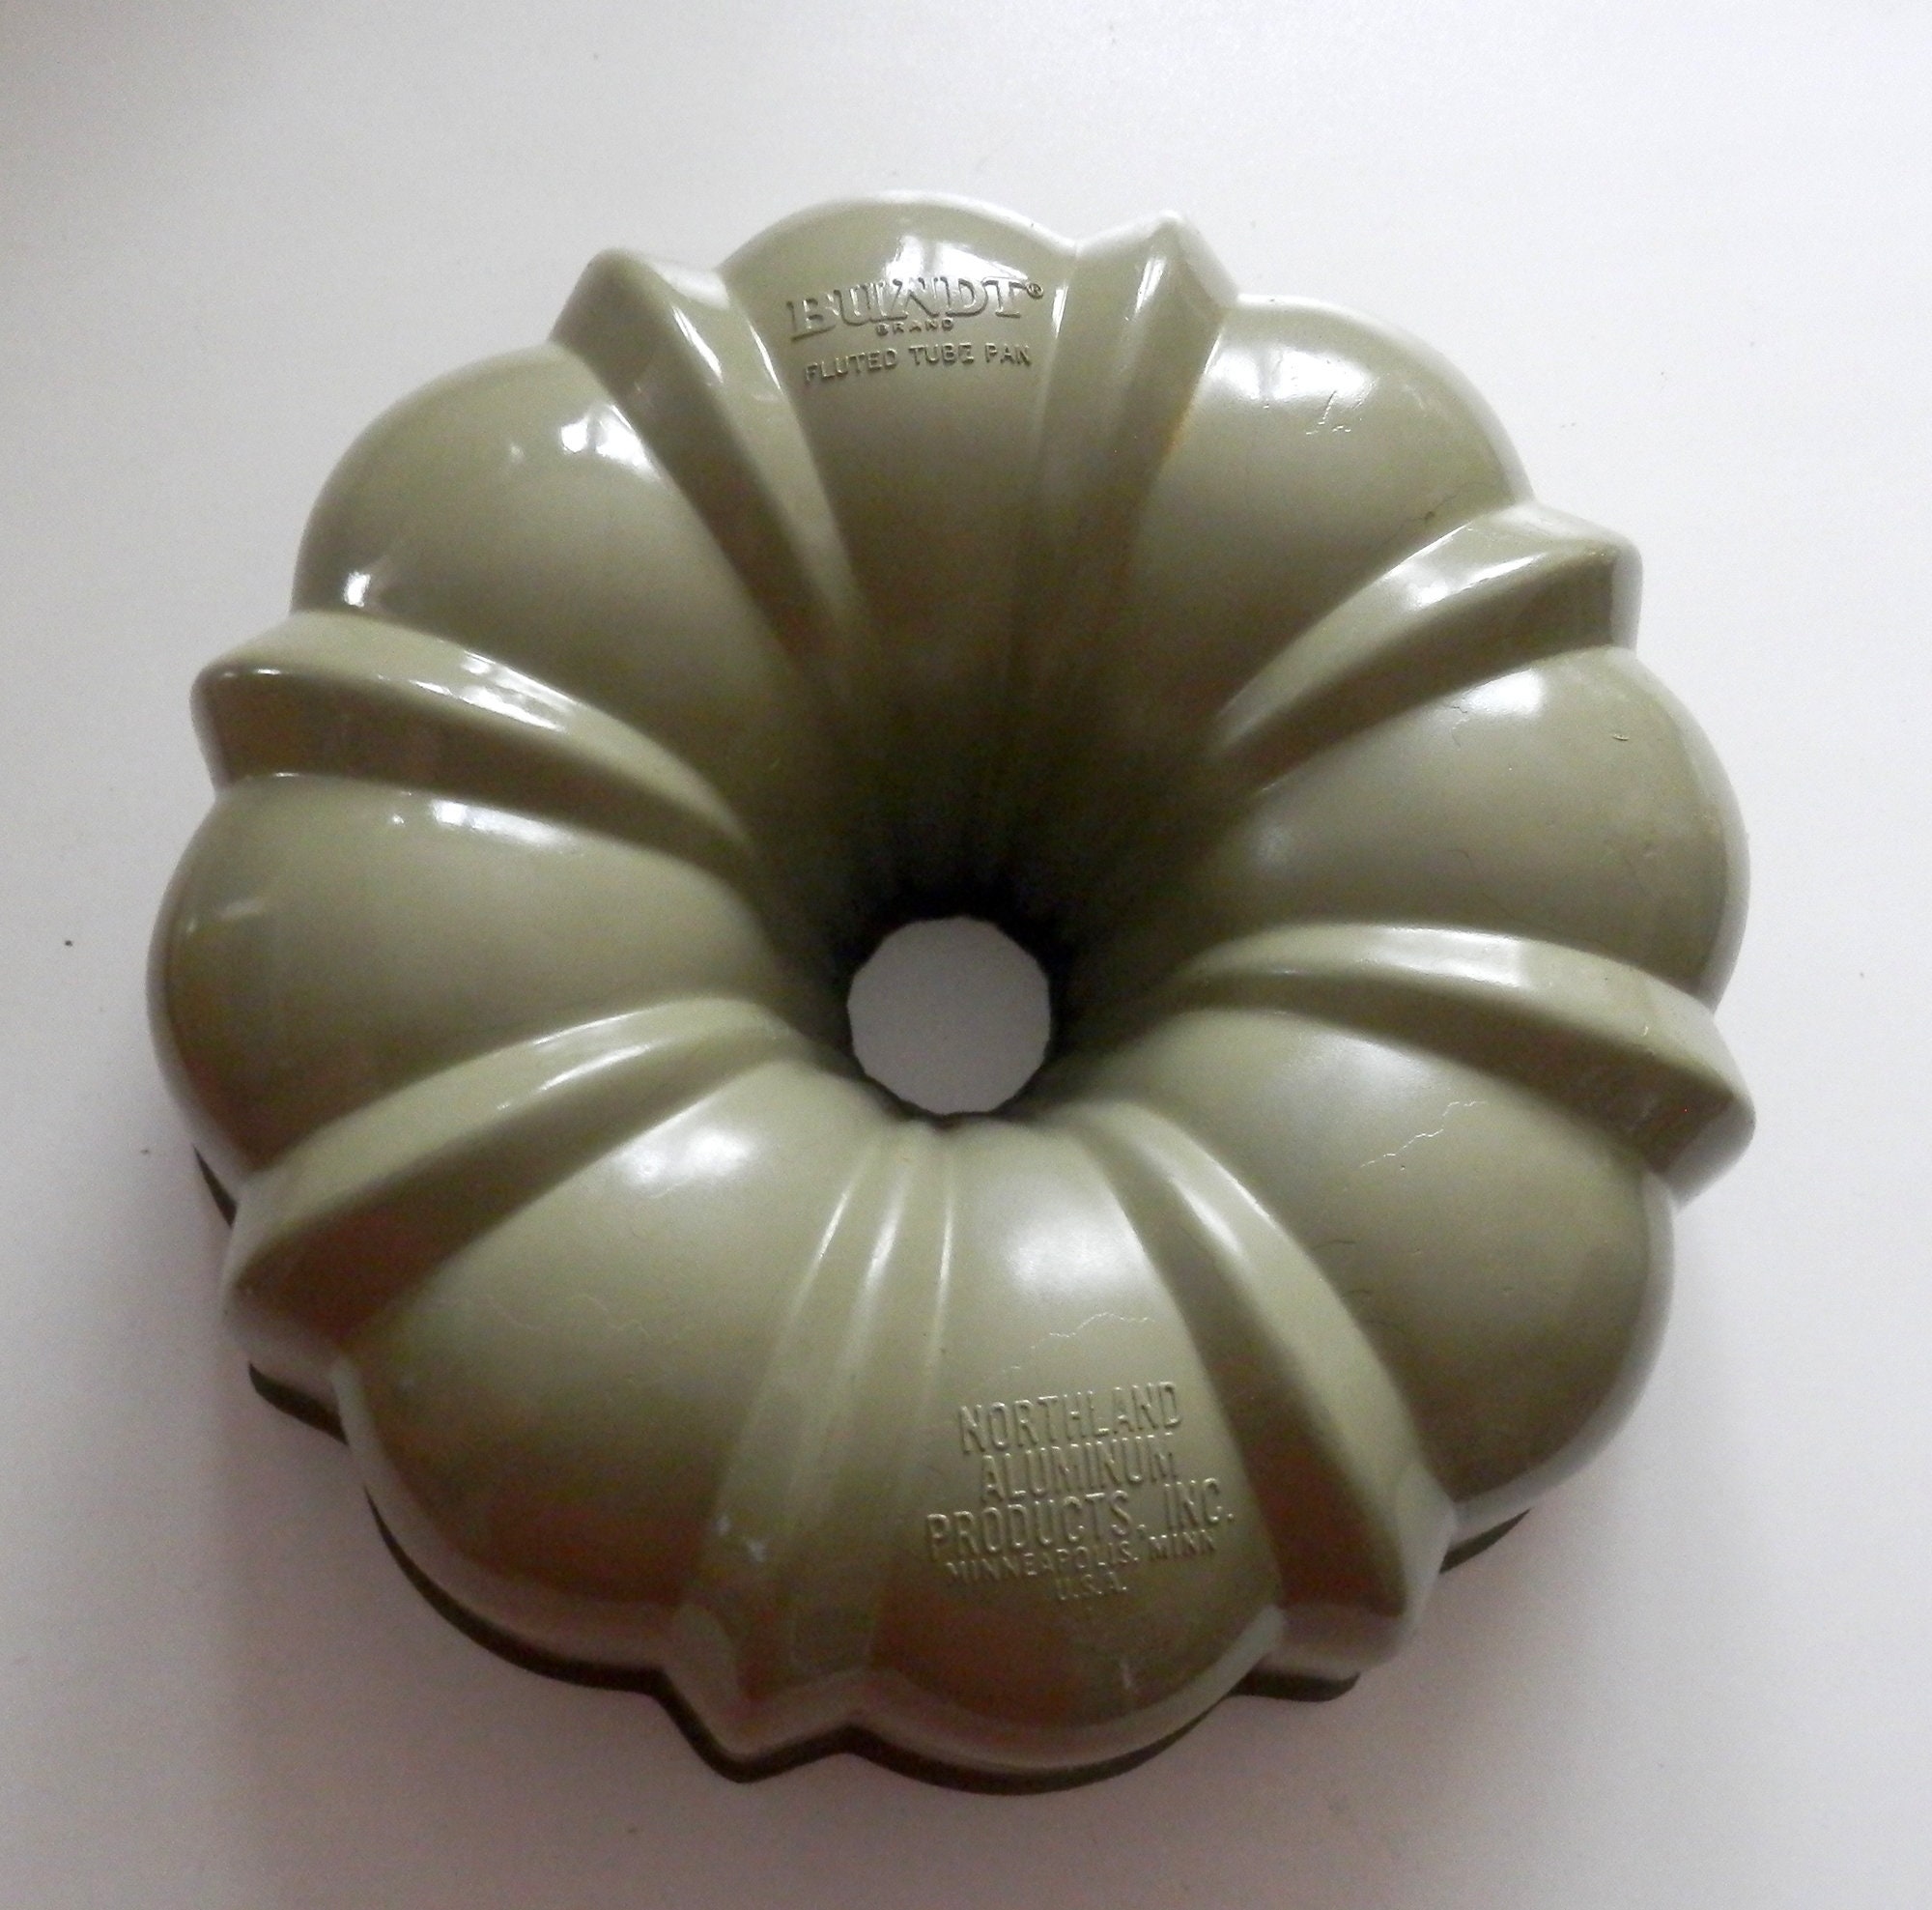 1973 Nordic Ware Bundt Pan in Original Packaging W/ Recipe Booklet, Insert  & Coupon Avocado Green Fluted Tube Pan the Real Thing WOW -  Norway